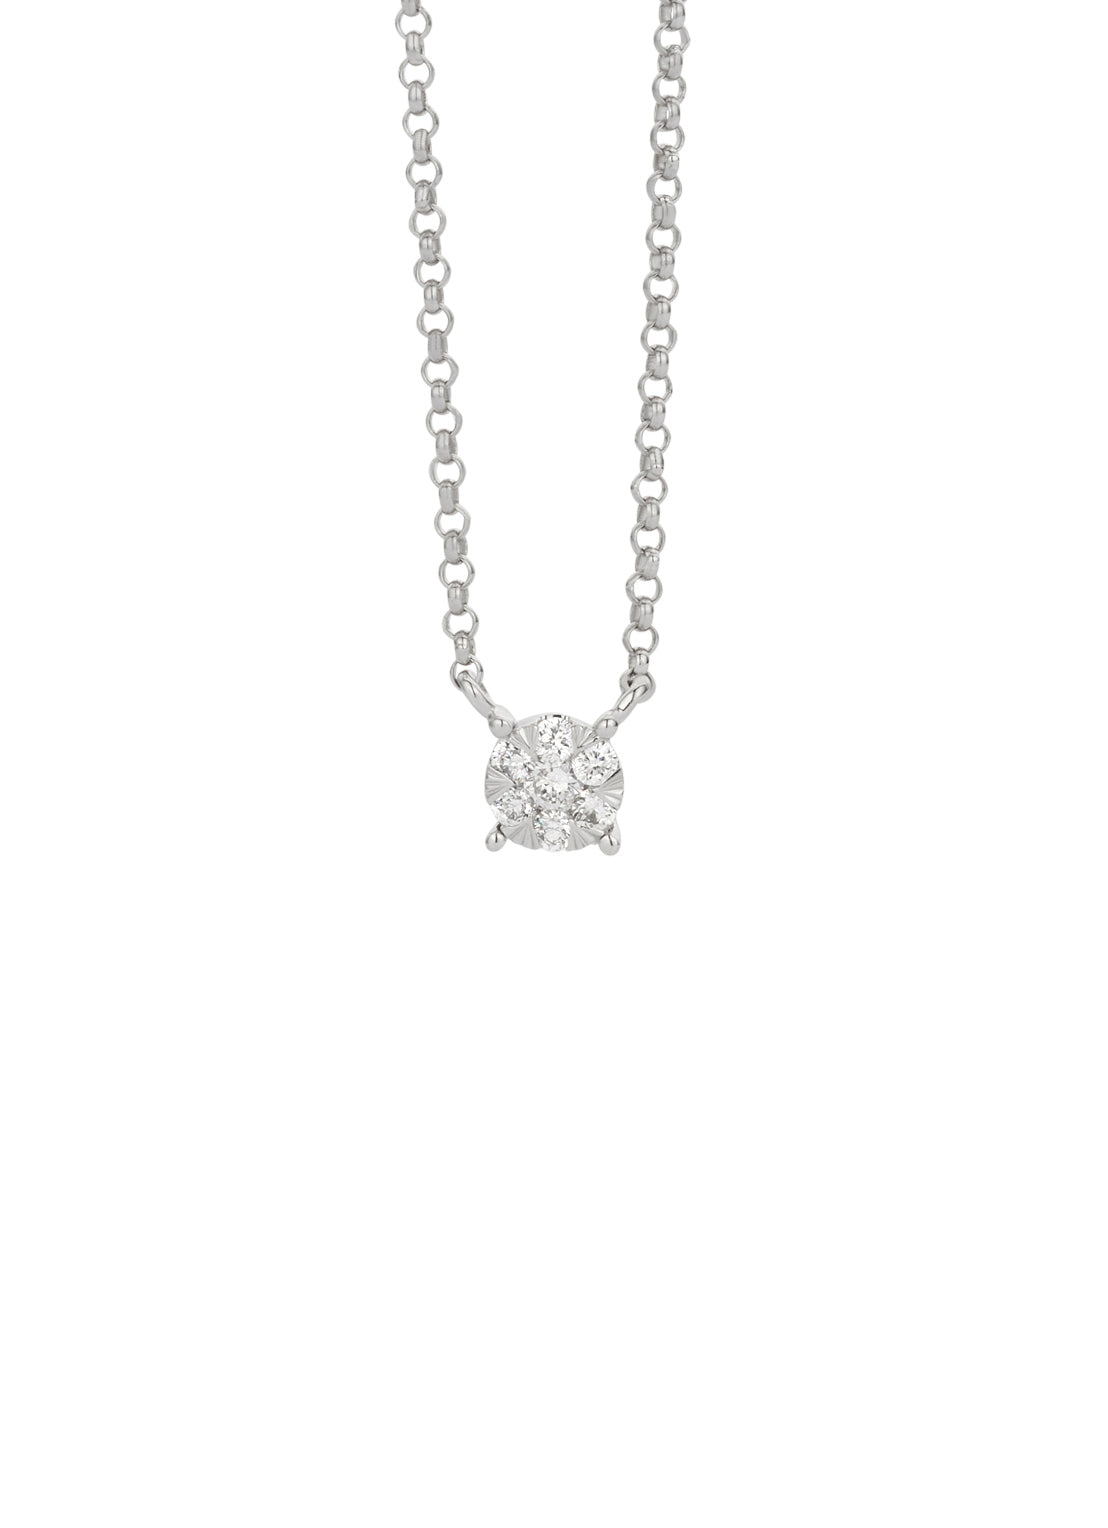 White gold pendant with necklace, 0.09 CT Diamond, Enchanted